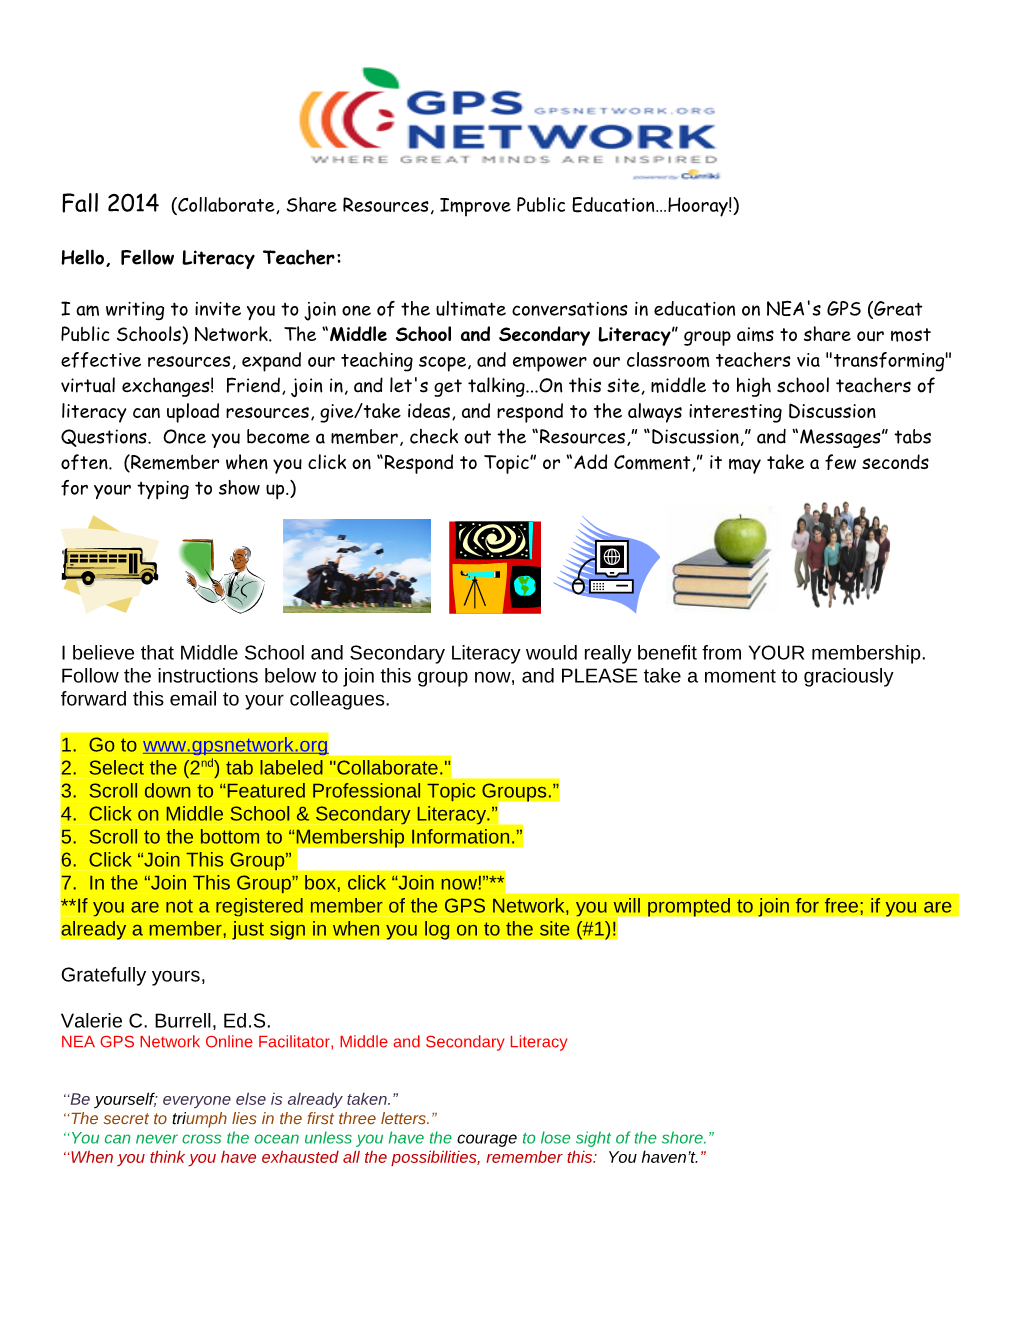 Fall 2014 (Collaborate, Share Resources, Improve Public Education Hooray!)